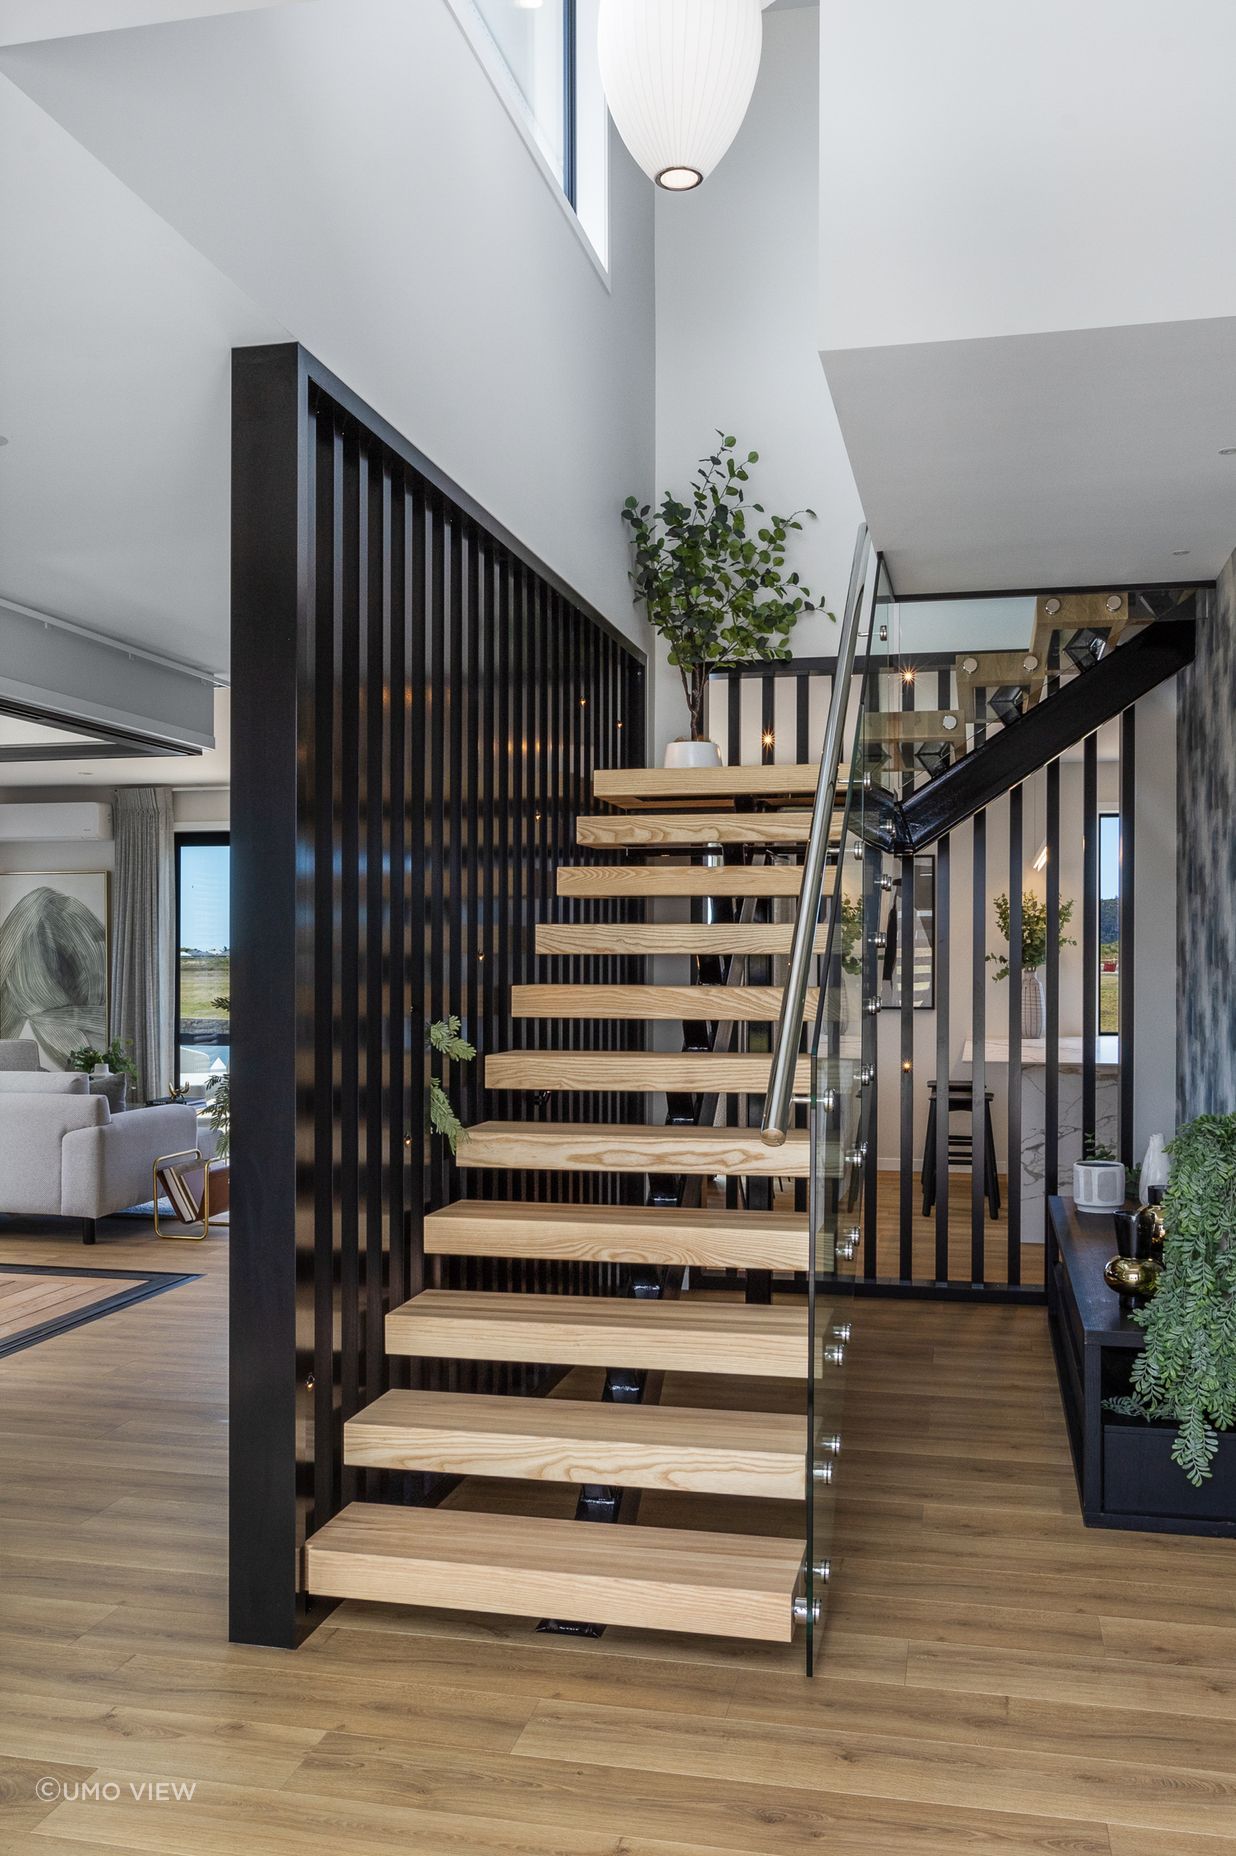 The stairwell leading to the second level creates a point of interest and sets the tone for the home’s sophisticated style.